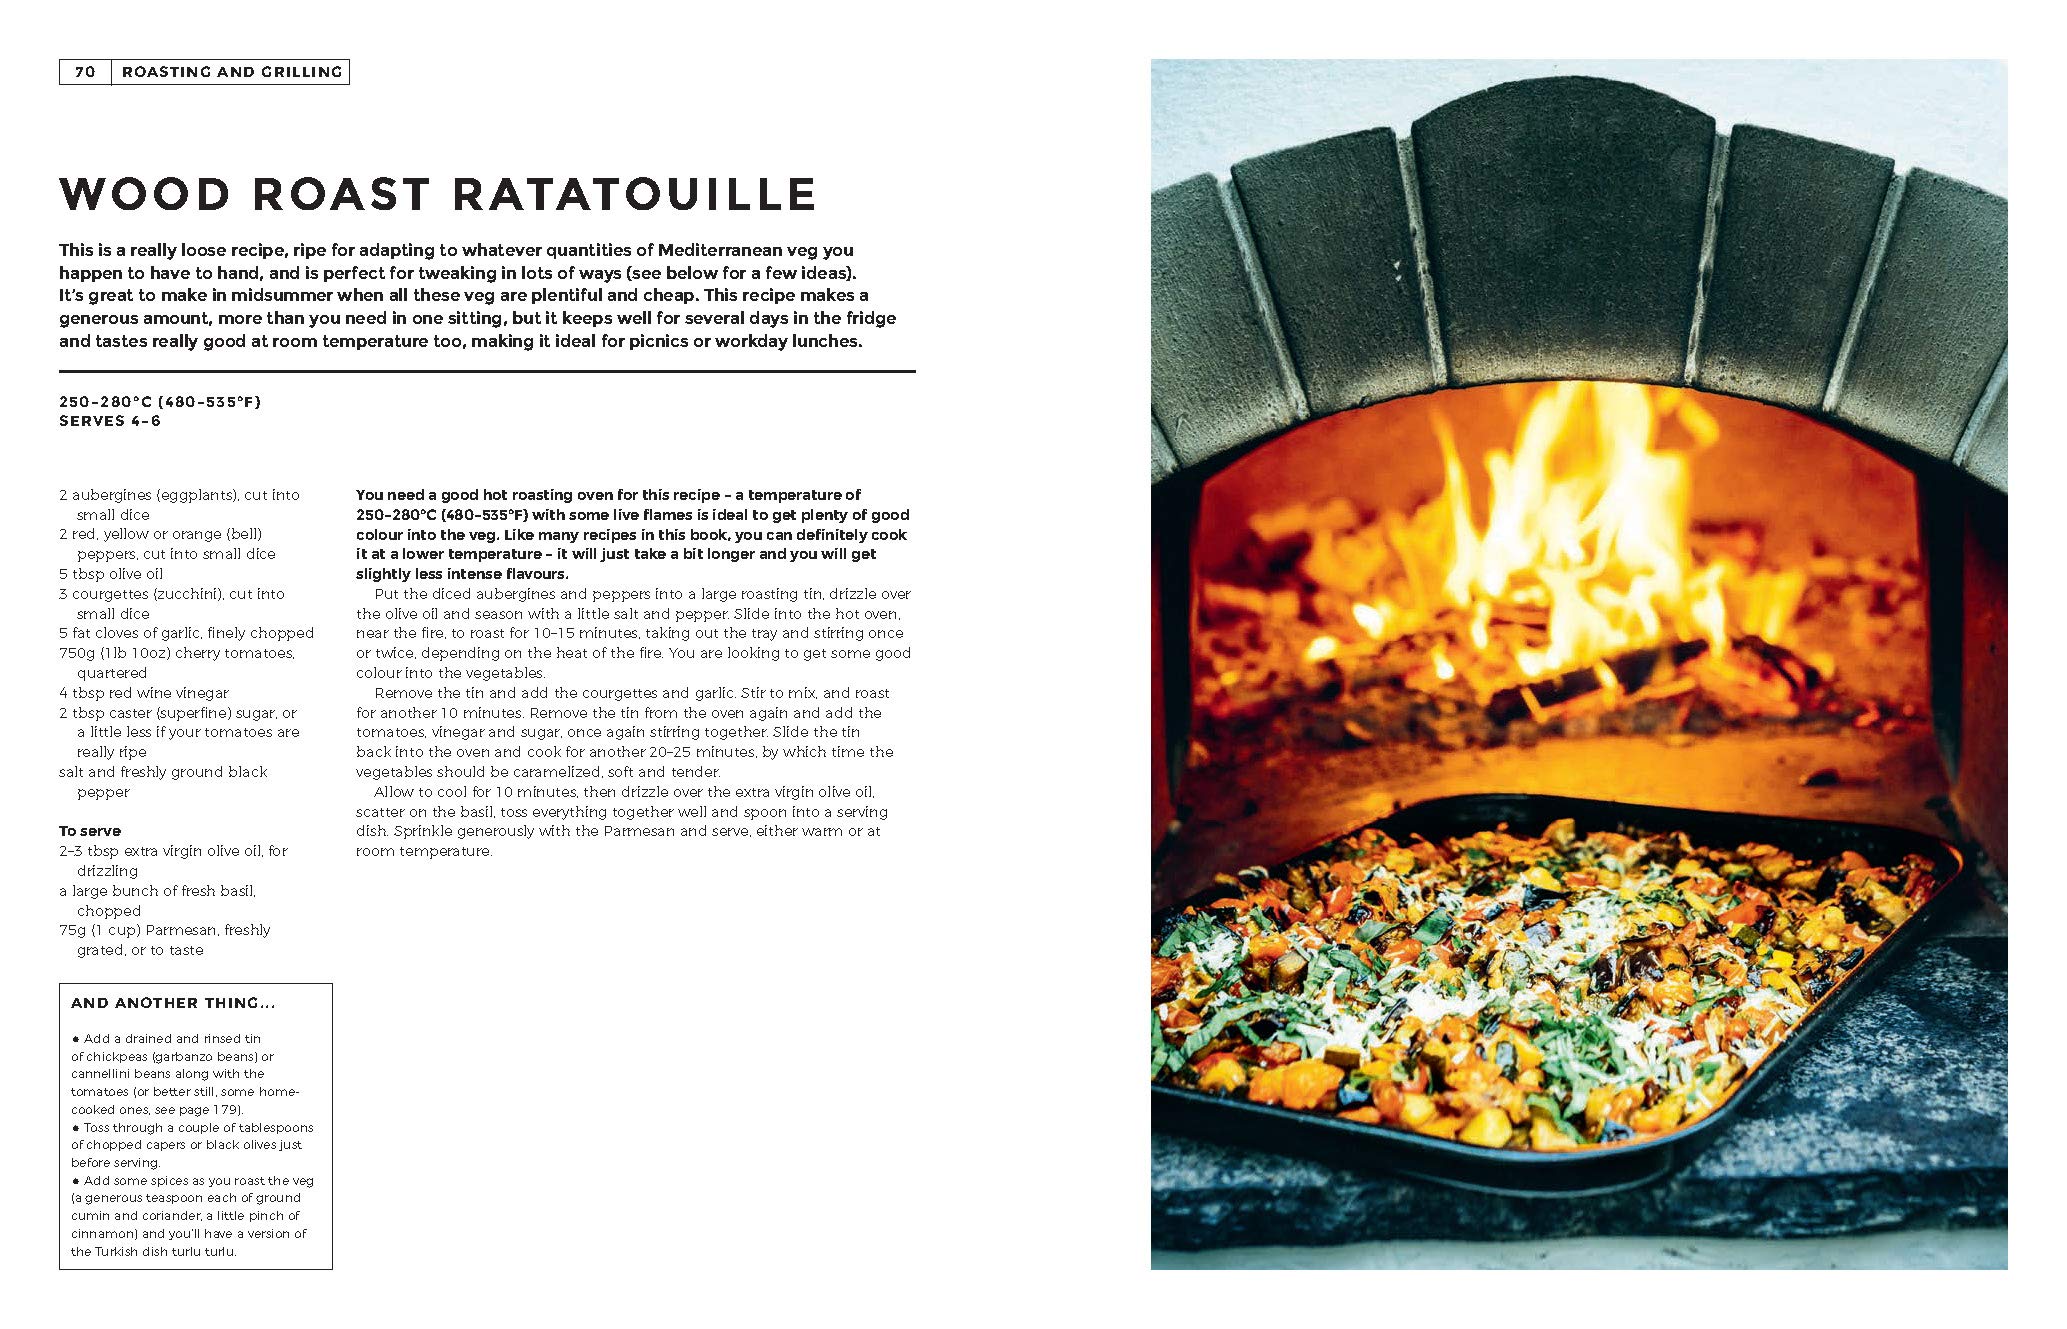 The Ultimate Wood Fired Oven Cookbook (Genevieve Taylor)